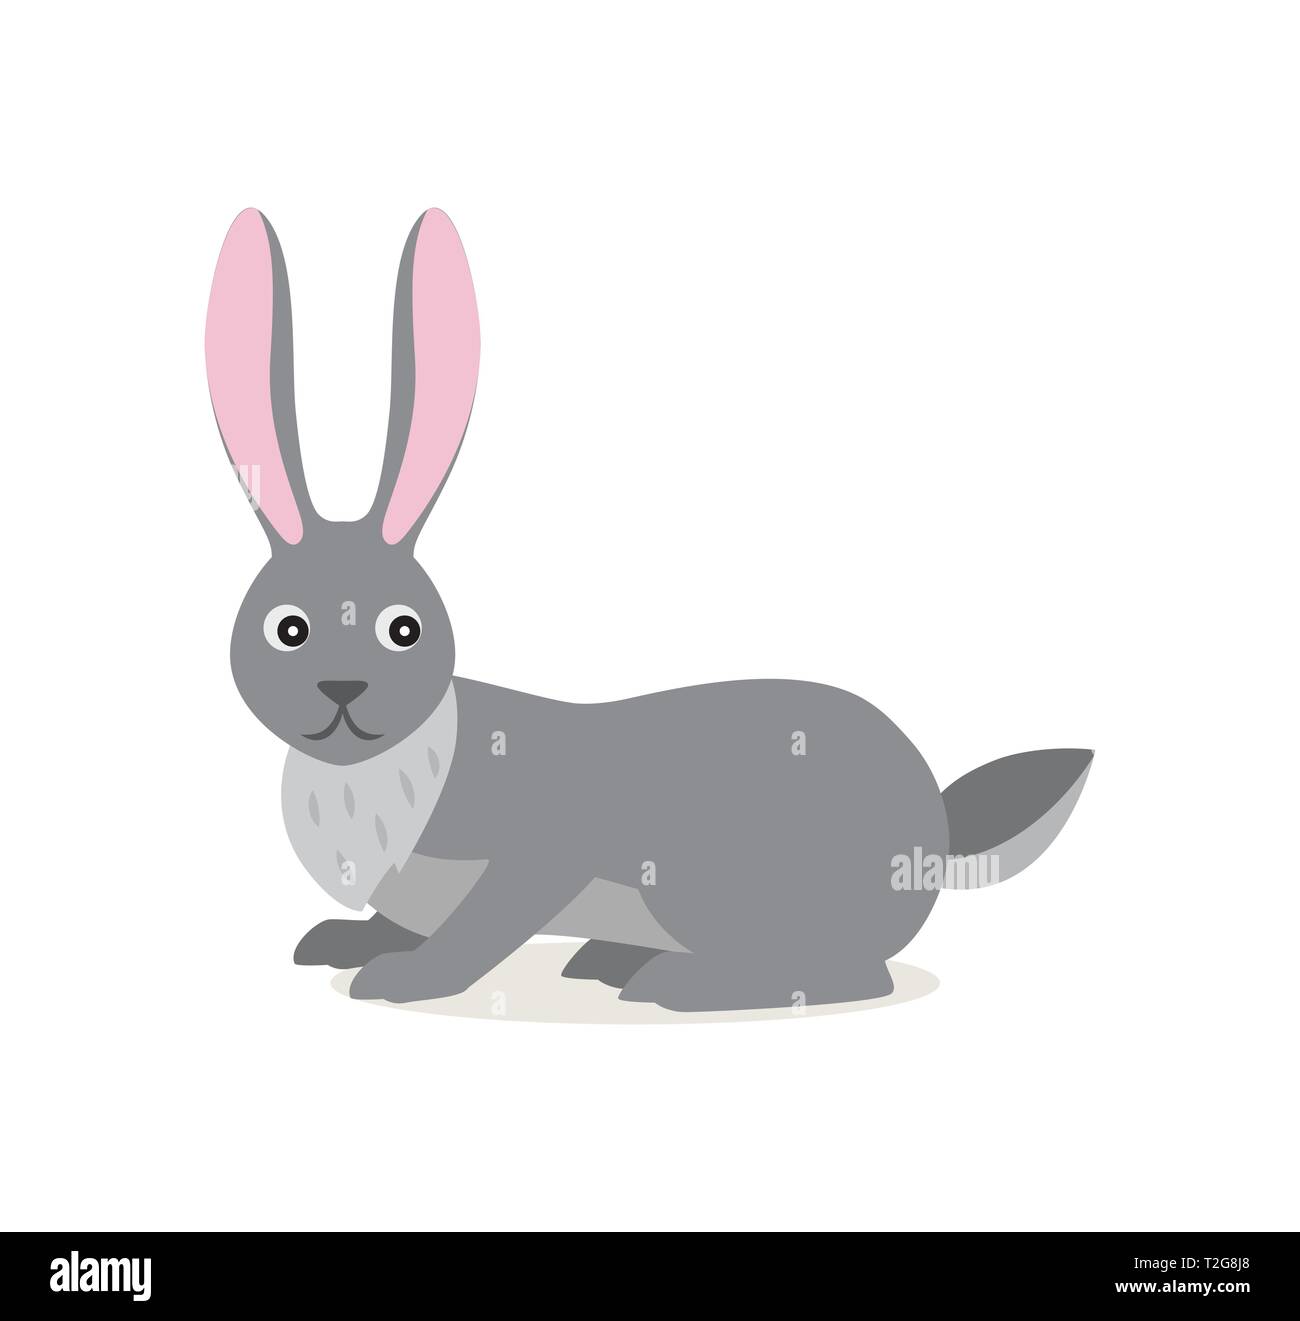 Cute gray rabbit hare isolated on white background, scared emotion, forest, woodland animal, vector illustration in flat style Stock Vector